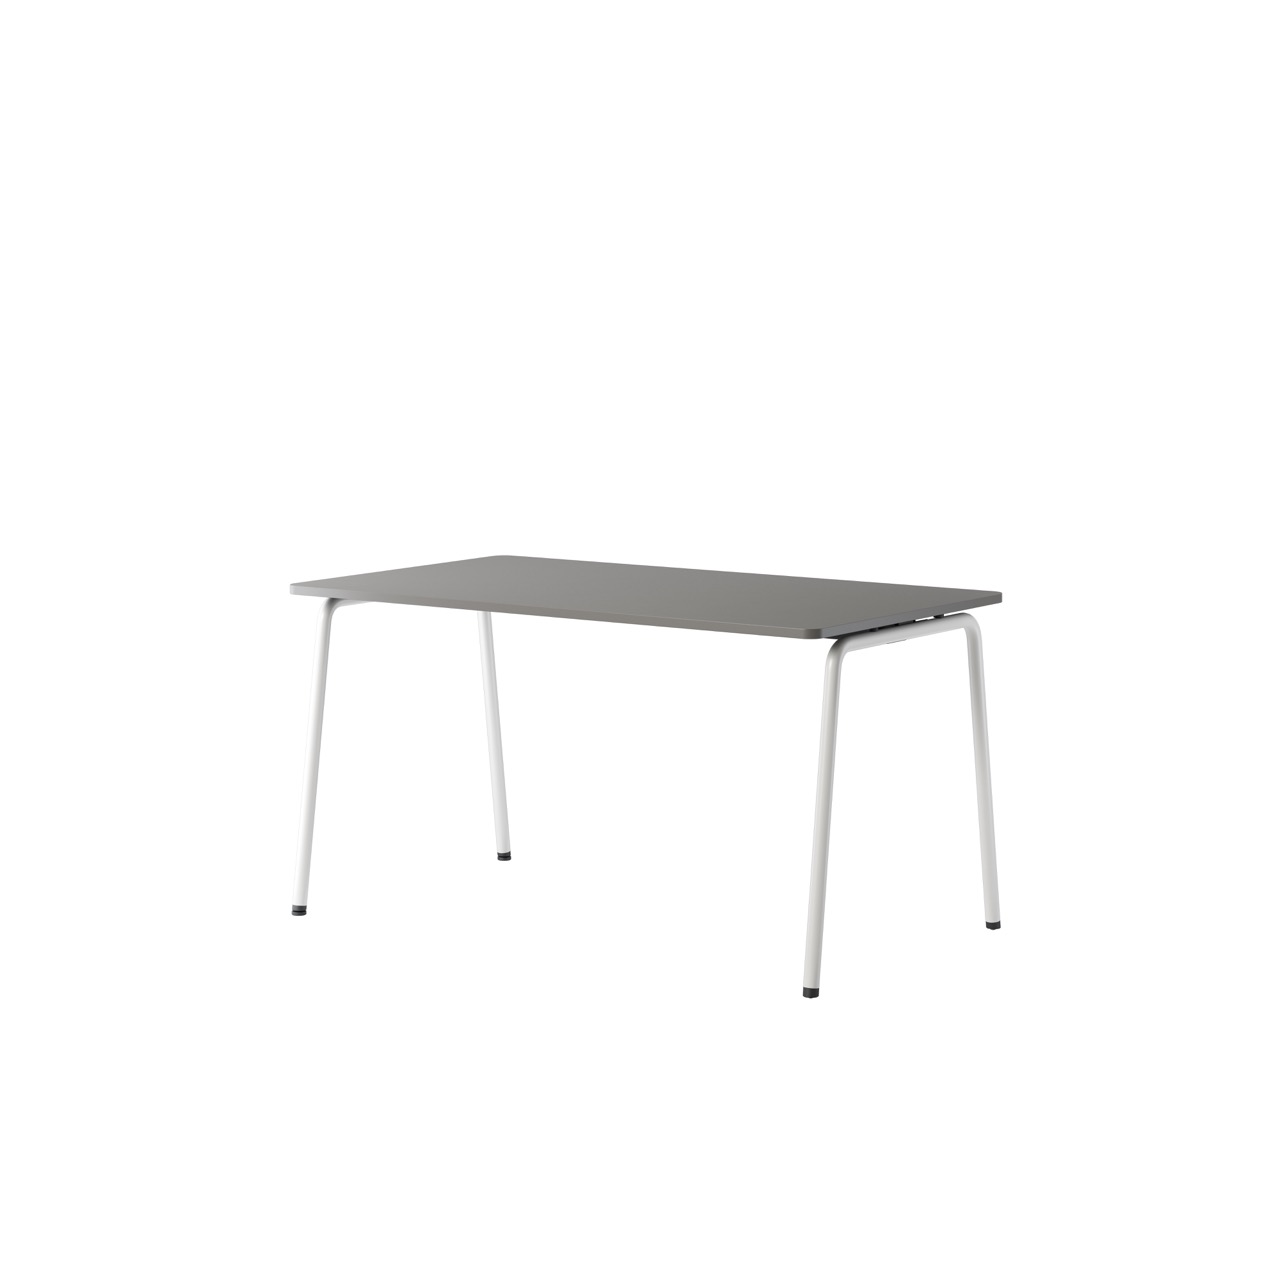 OCEE&FOUR - Tables - FourReal 74 - 140 x 80 - Angled - Packshot Image 5 Large